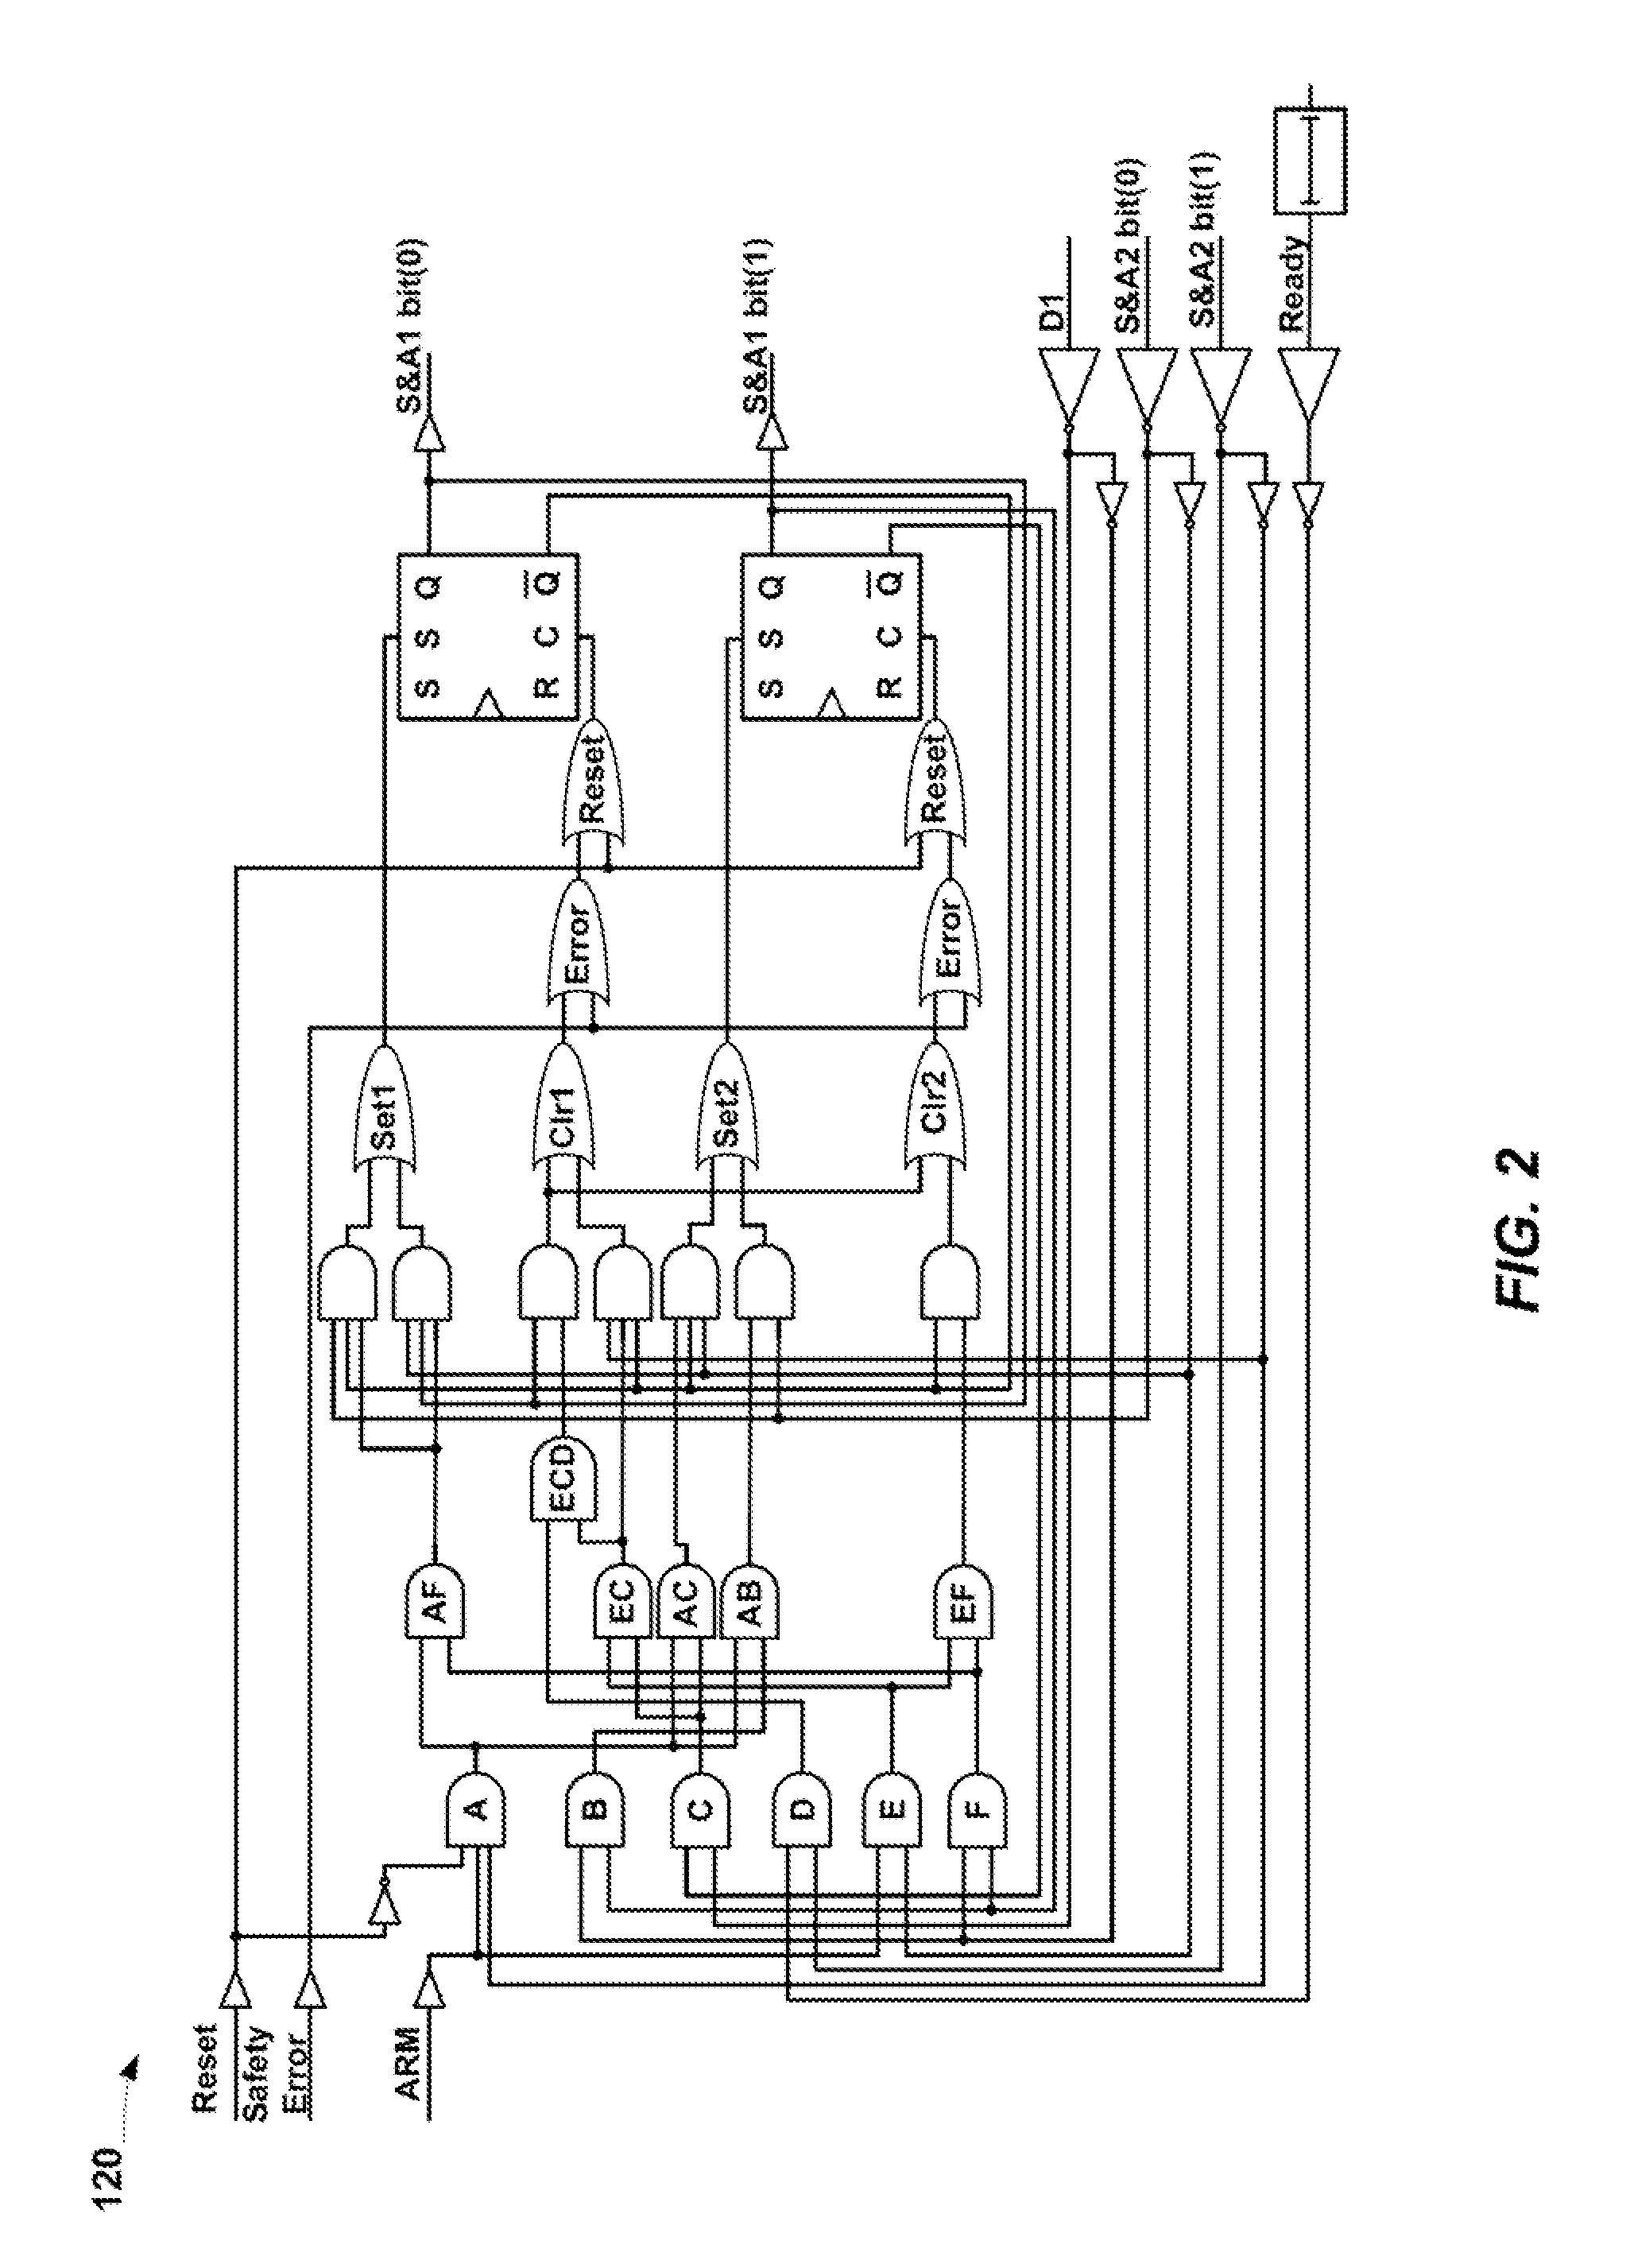 Dynamic Switching System for Use in In-Line Explosive Trains